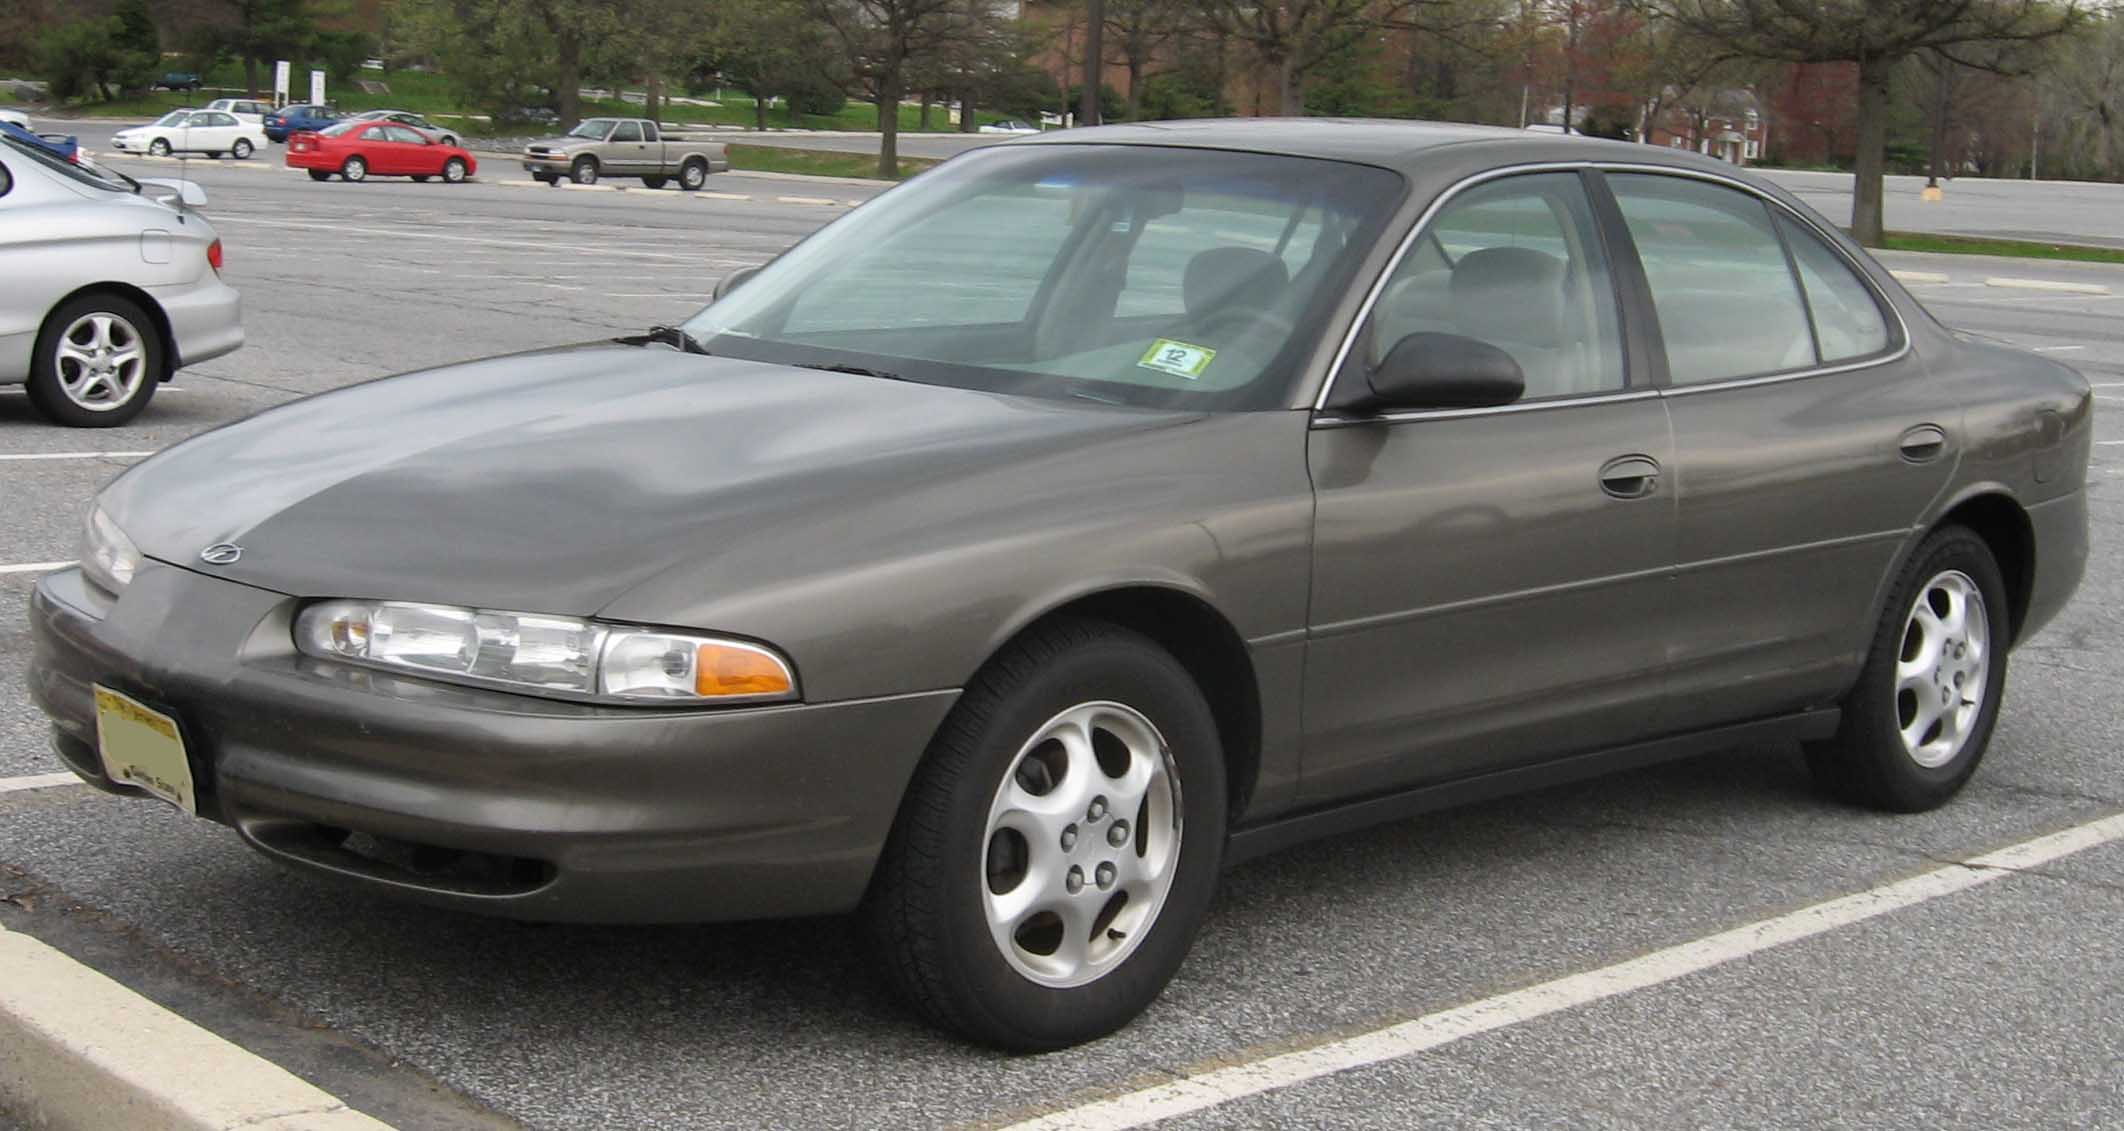 File:Oldsmobile Intrigue.jpg - Wikimedia Commons